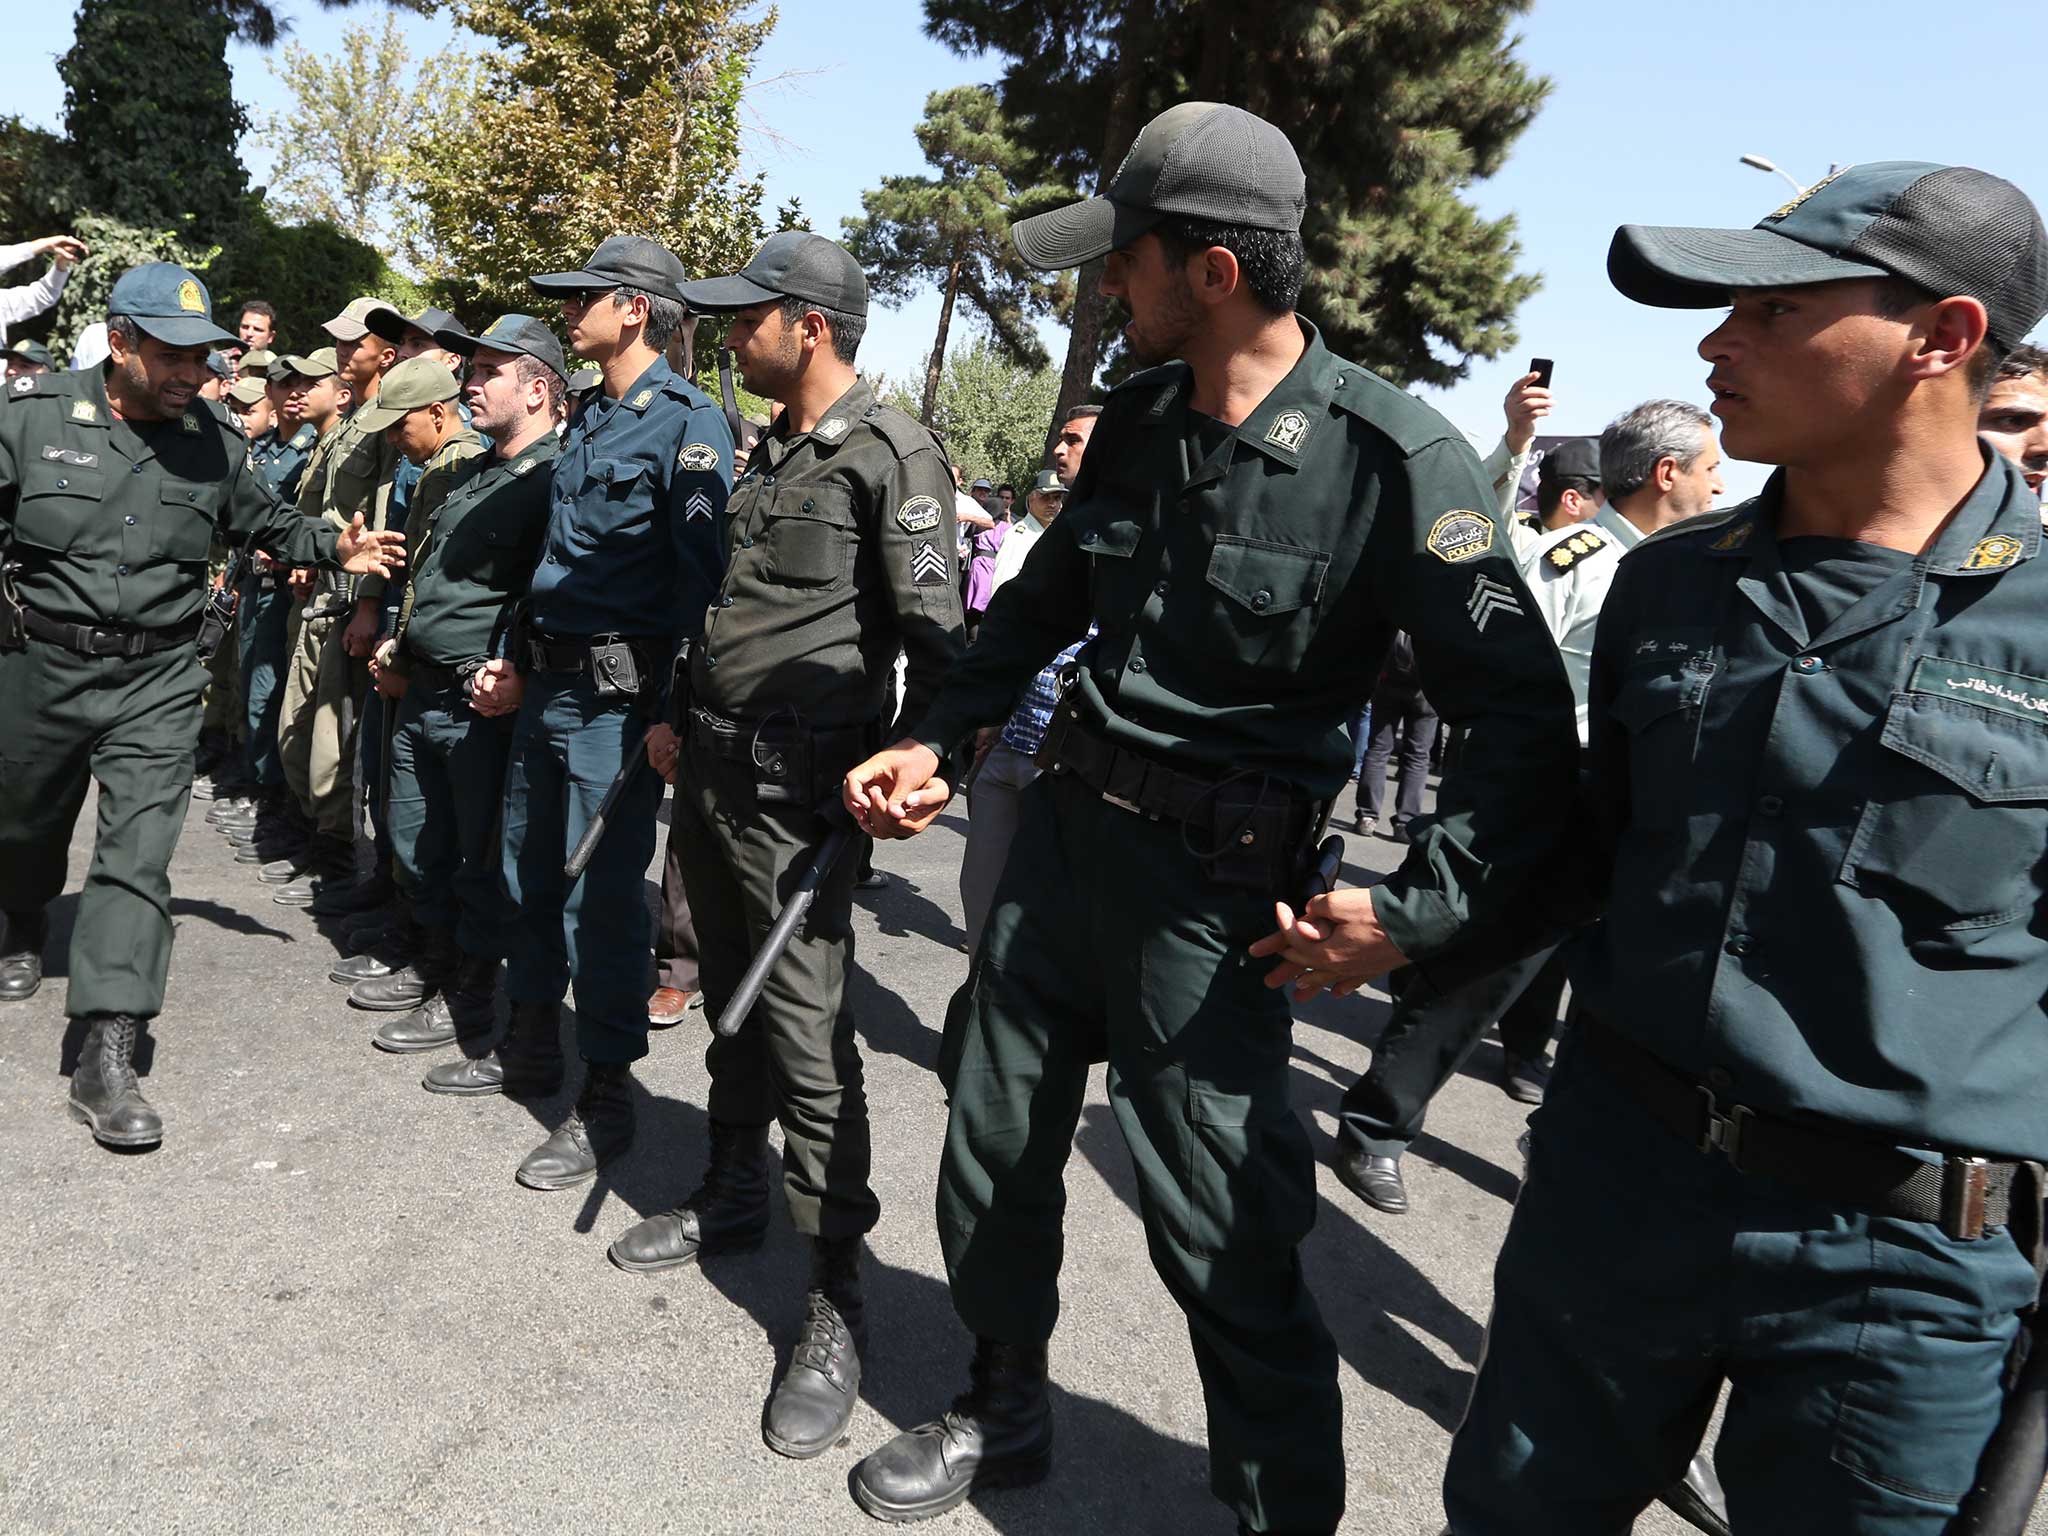 Iranian police pictured in 2013